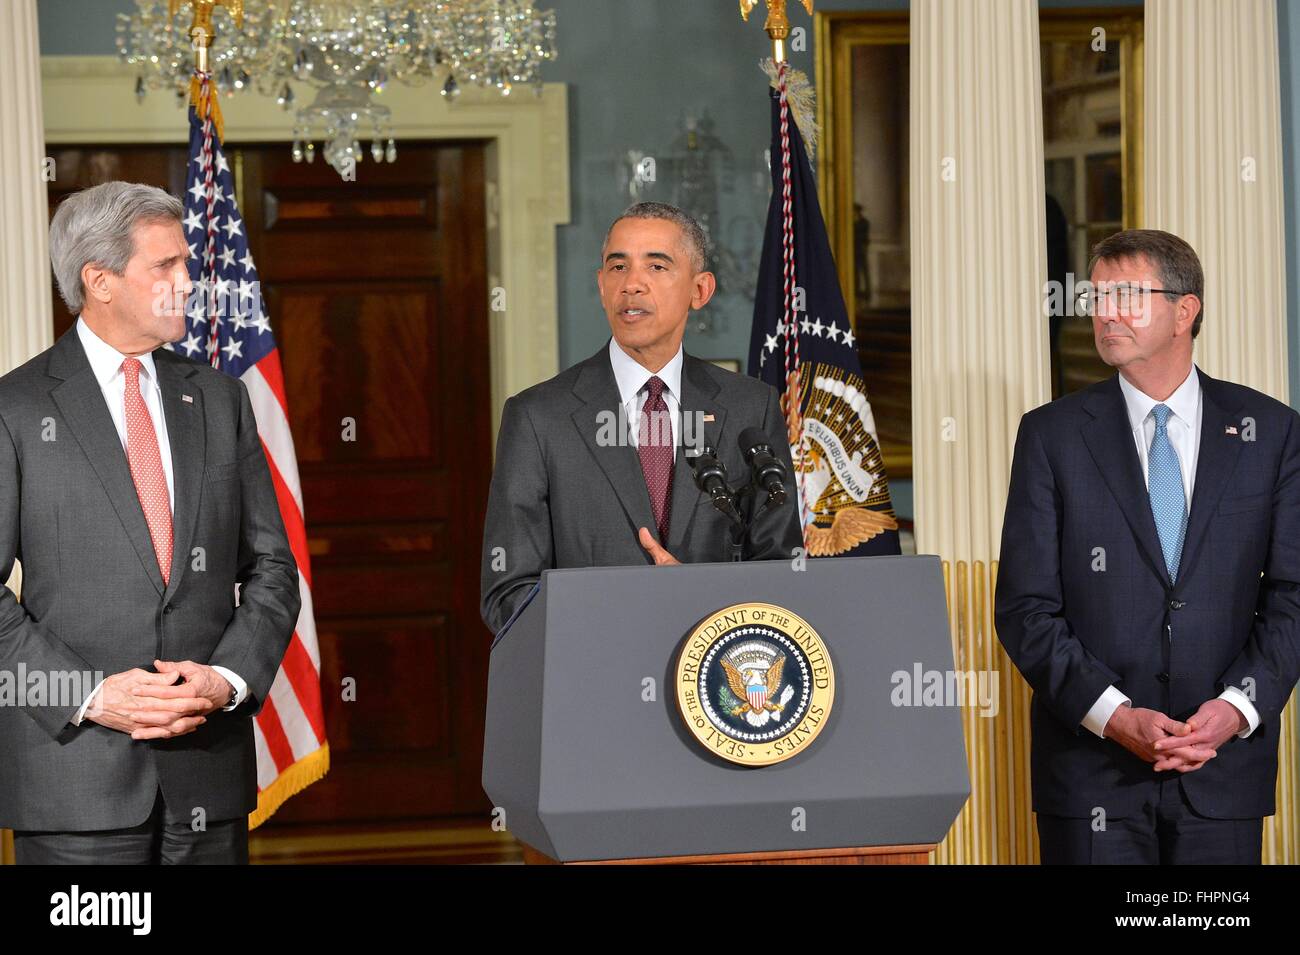 Washington DC, USA. 25th February, 2016. U.S President Barack Obama flanked by Secretary of State John Kerry and Defense Secretary Ashton Carter, addresses the media following a meeting with the National Security Council on the global campaign to degrade and destroy ISIL at the State Department February 25, 2016 in Washington, DC.  Obama ordered his national security team to 'continue accelerating' the U.S led military campaign against the Islamic State. Stock Photo